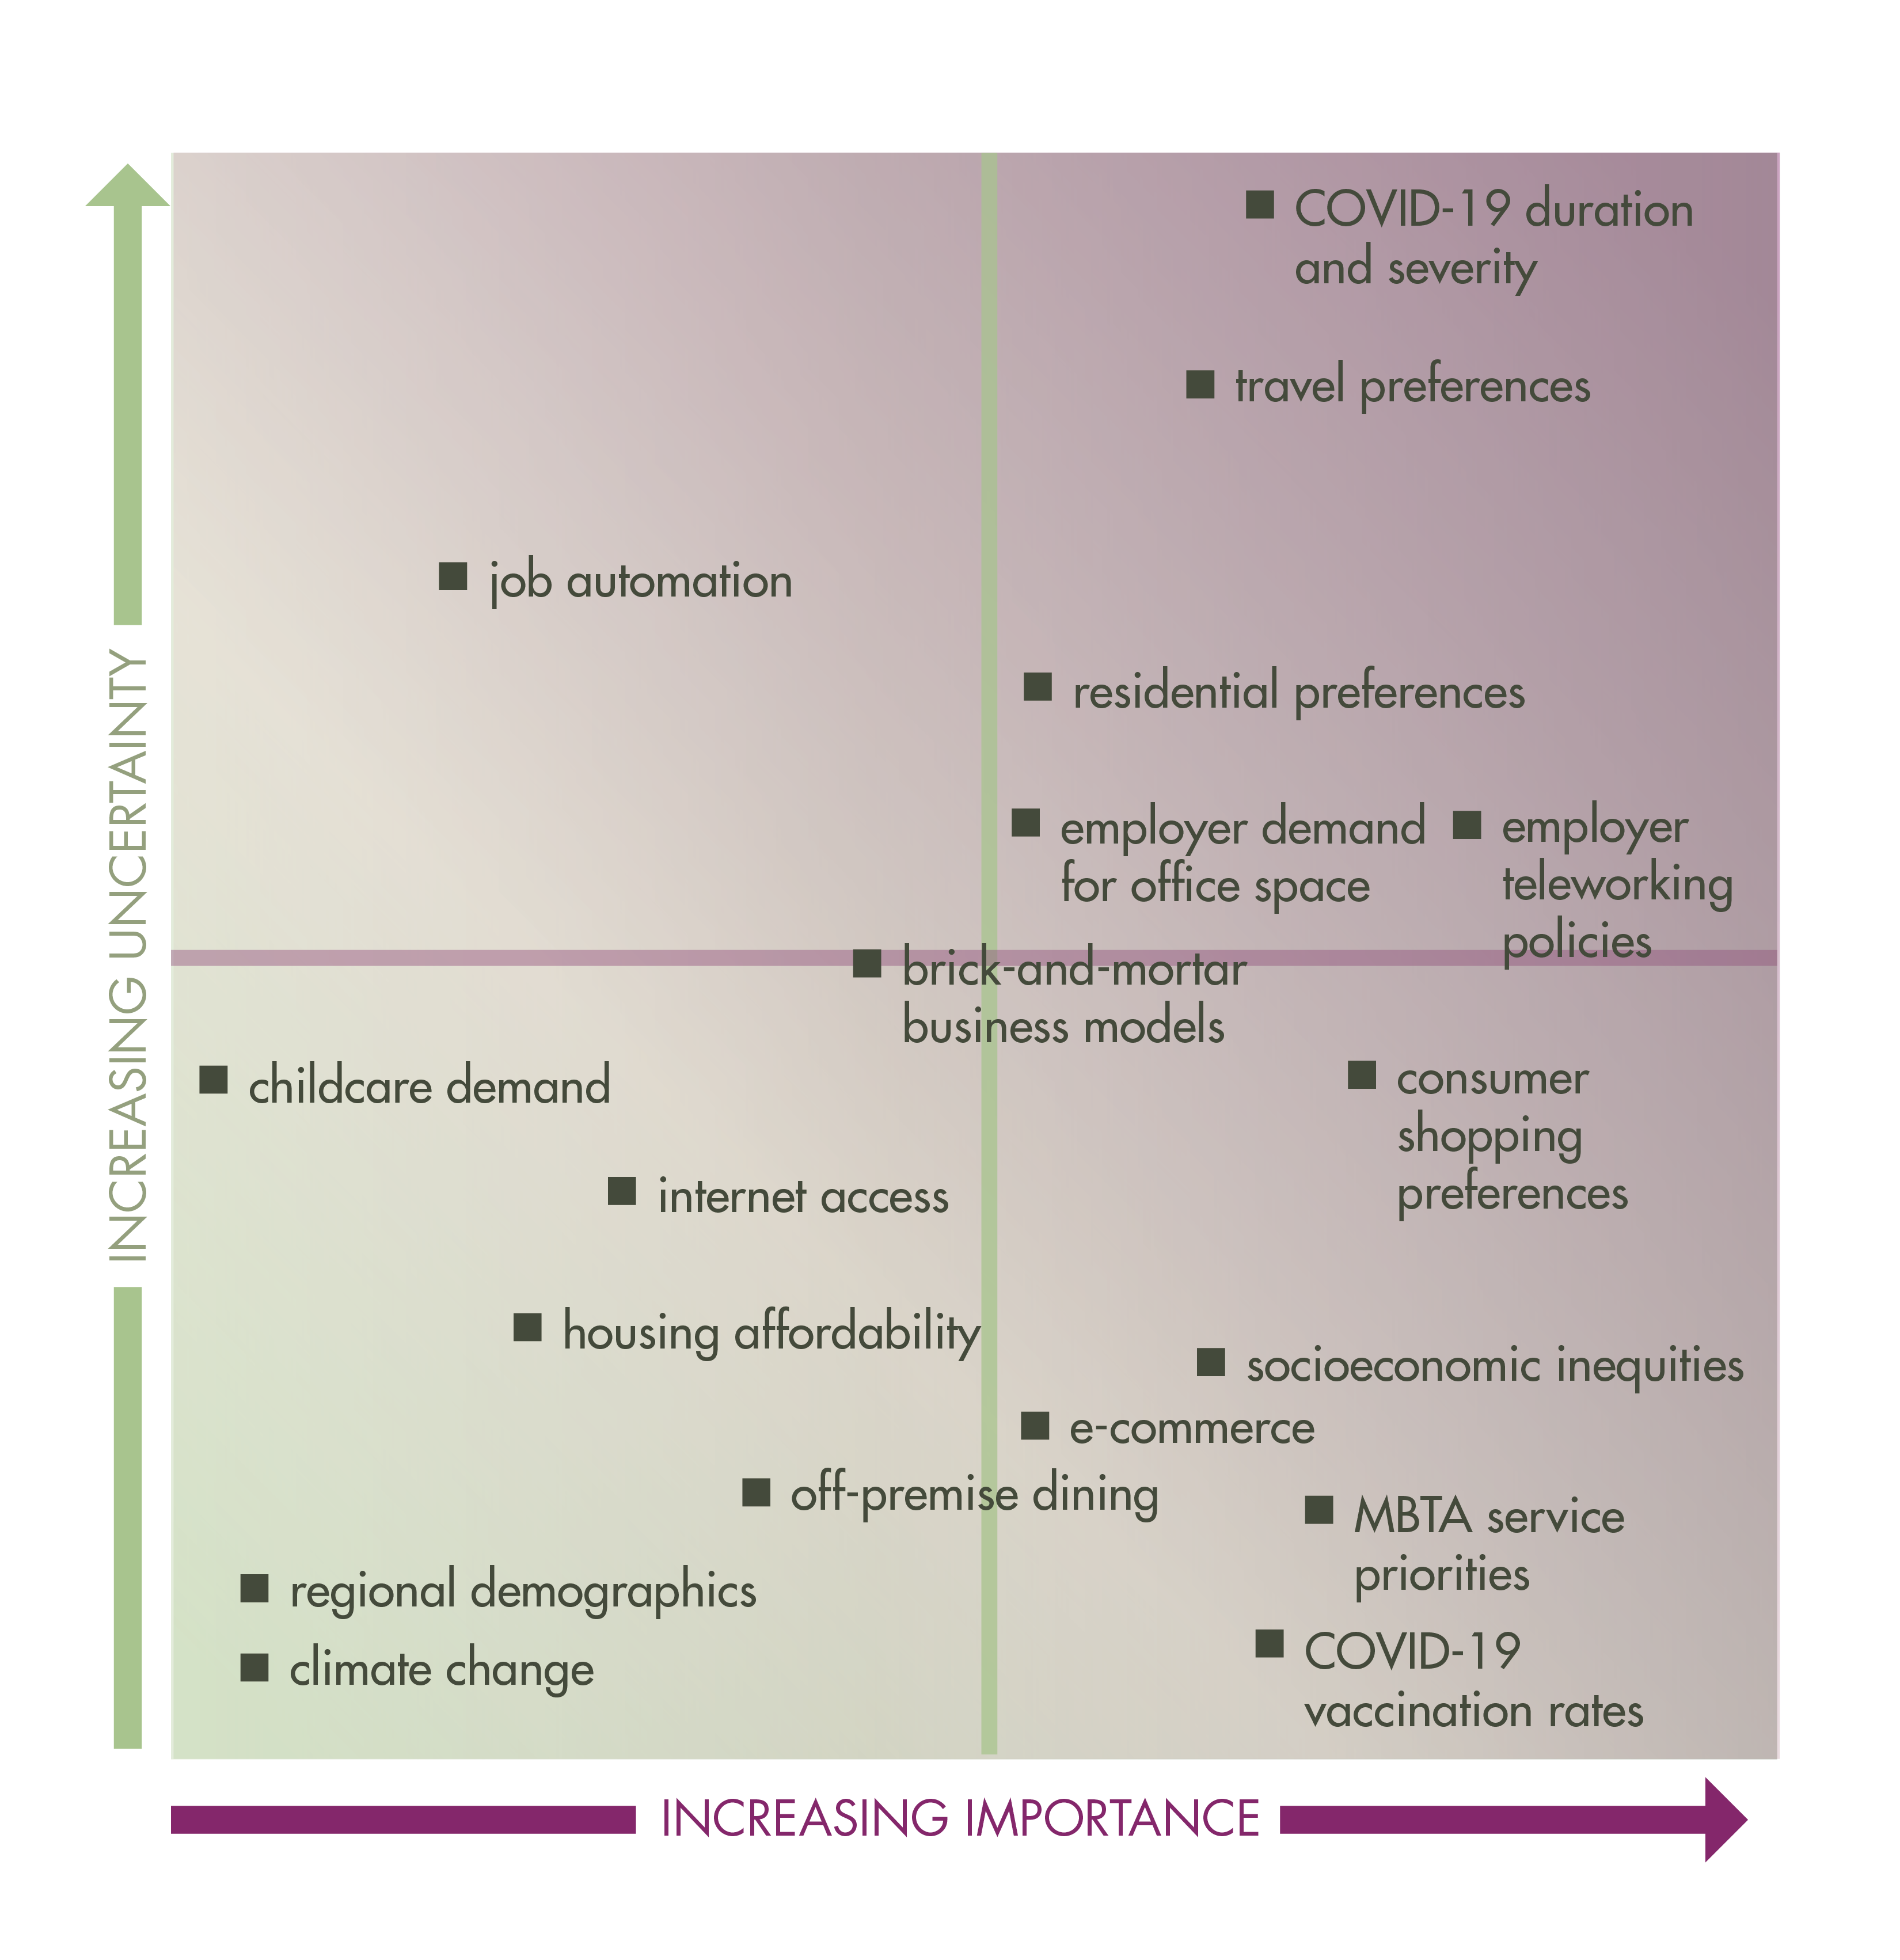 This is an illustration of a dot chart in 4 quadrants showing the driving forces ranked by uncertainty and importance. Some of the forces include regional demographics, job automation, travel and residential preferences, employer telework policies  or demand for office space and e-commerce.